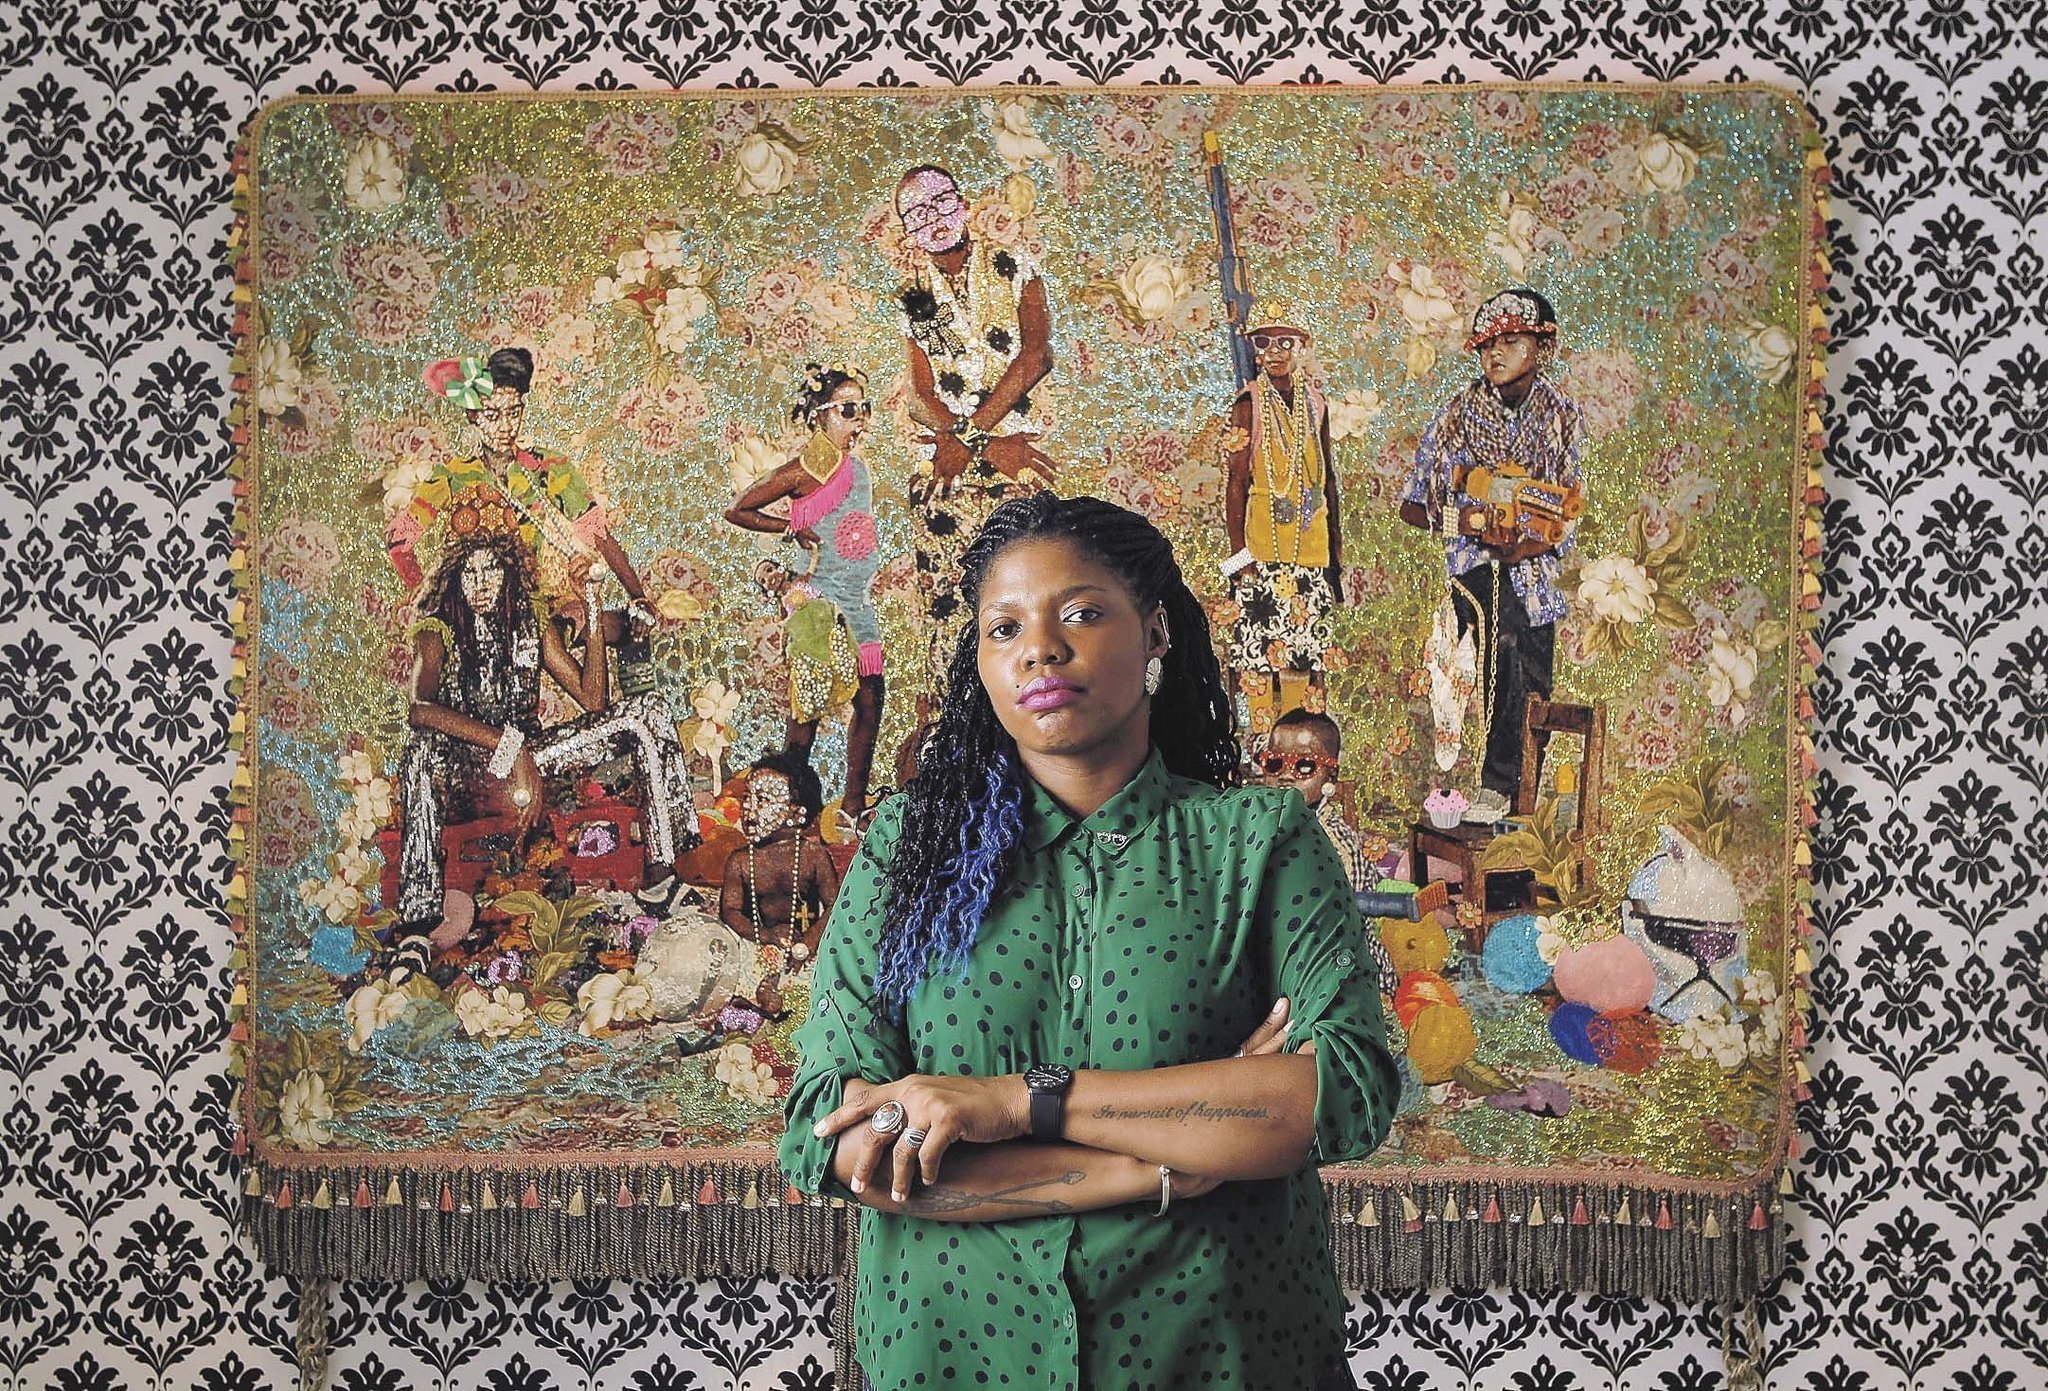 An interview with Jamaican artist Ebony G. Patterson, now in residence at the Lux Art ...2048 x 1391